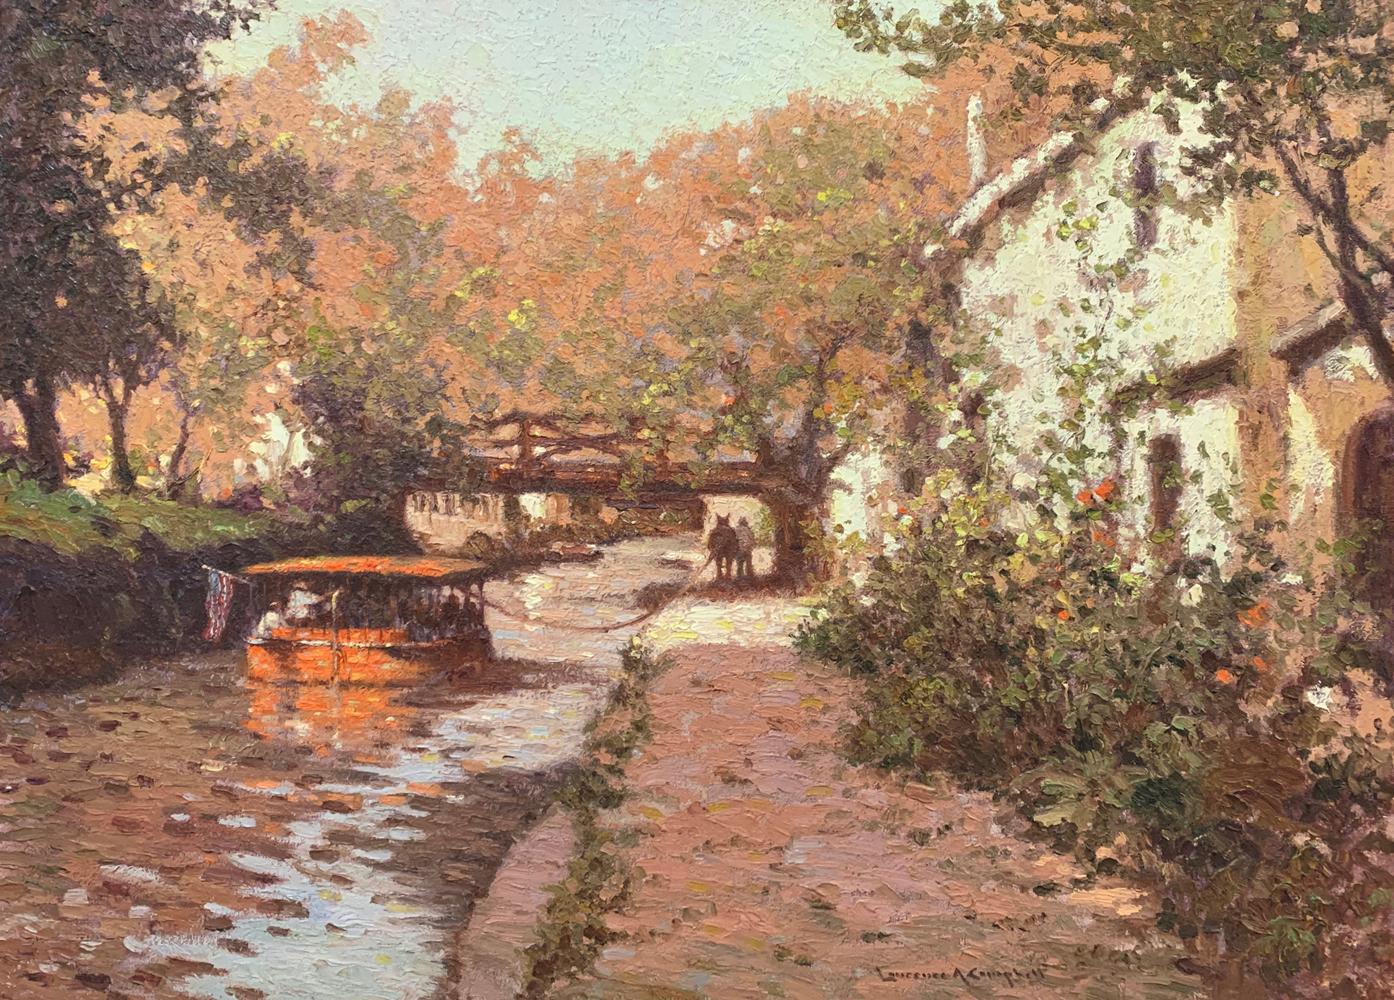 New Hope Canal, Bucks County, Pennsylvania Impressionist, Regional Landscape - Painting by Laurence A. Campbell